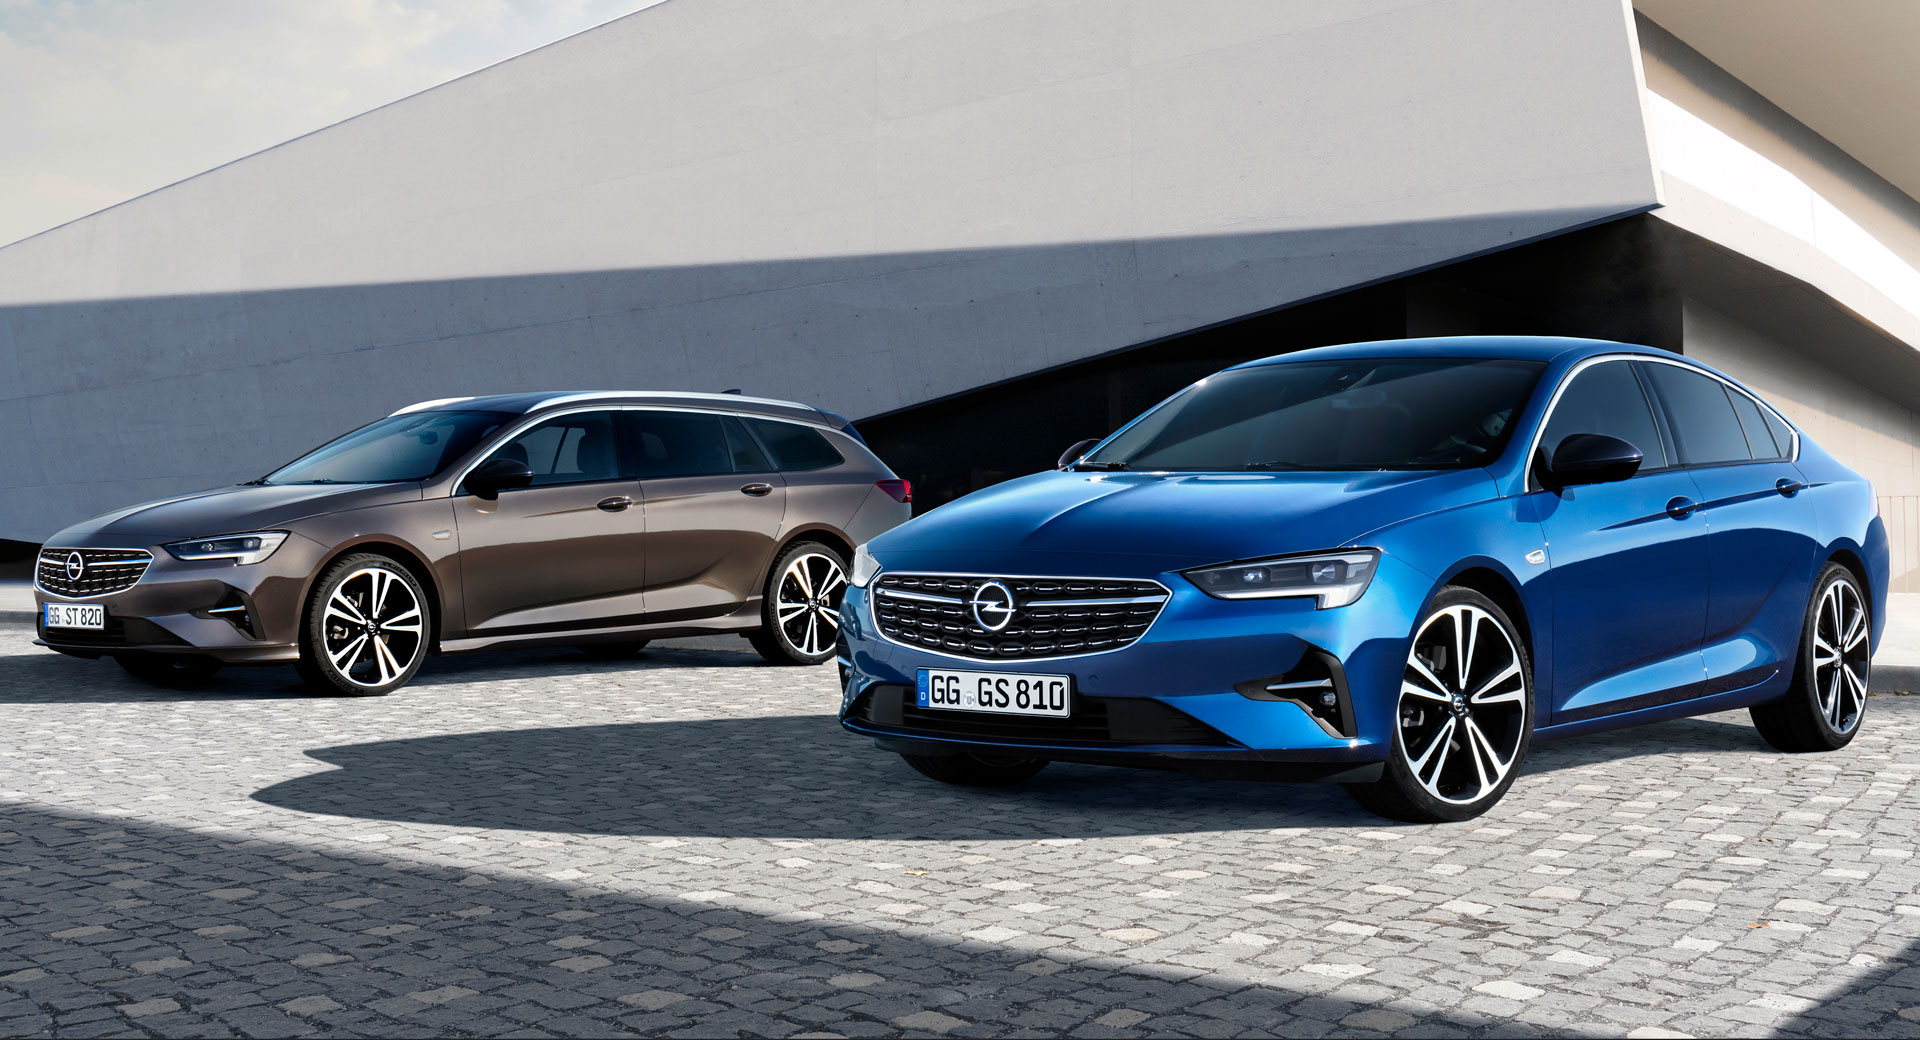 2020 Opel Insignia Sports Tourer Car Editorial Photography - Image of  insignia, motorshow: 160098497